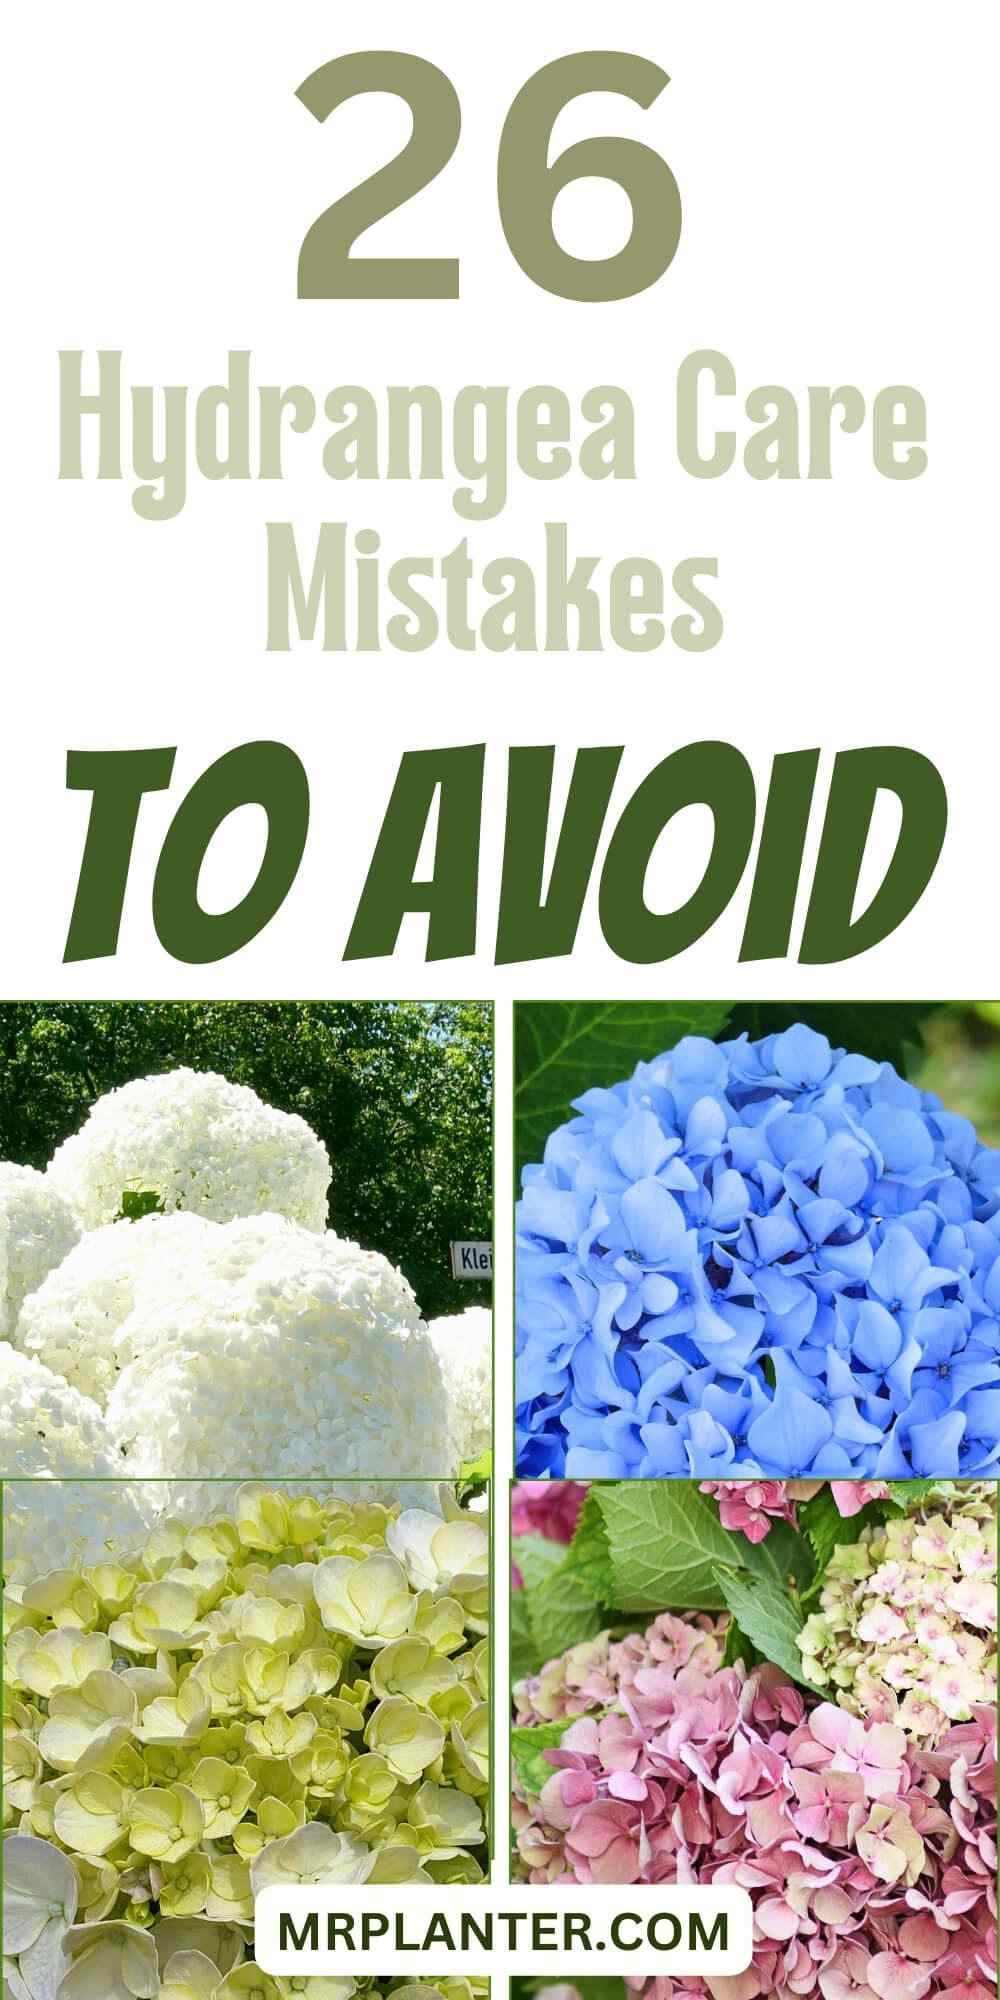 26 Mistakes You Should Never Make with Your Hydrangeas